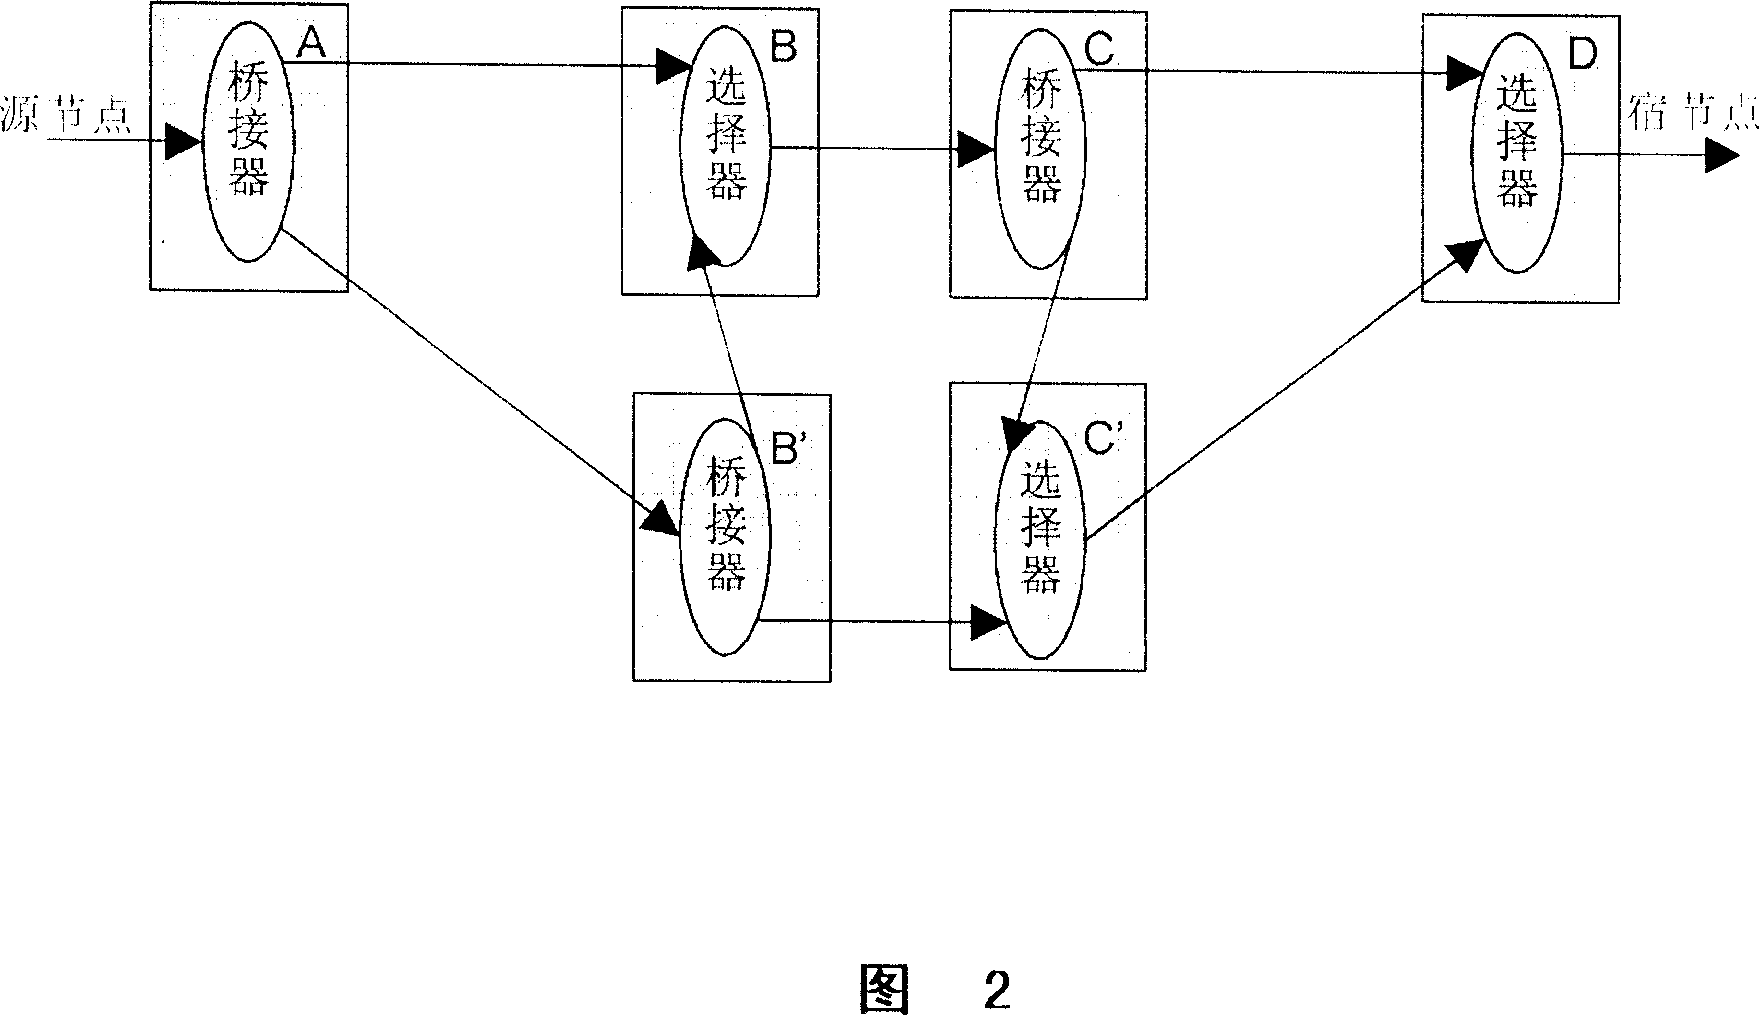 Method for protecting 1+1 single sub-network connection and communication network using the method